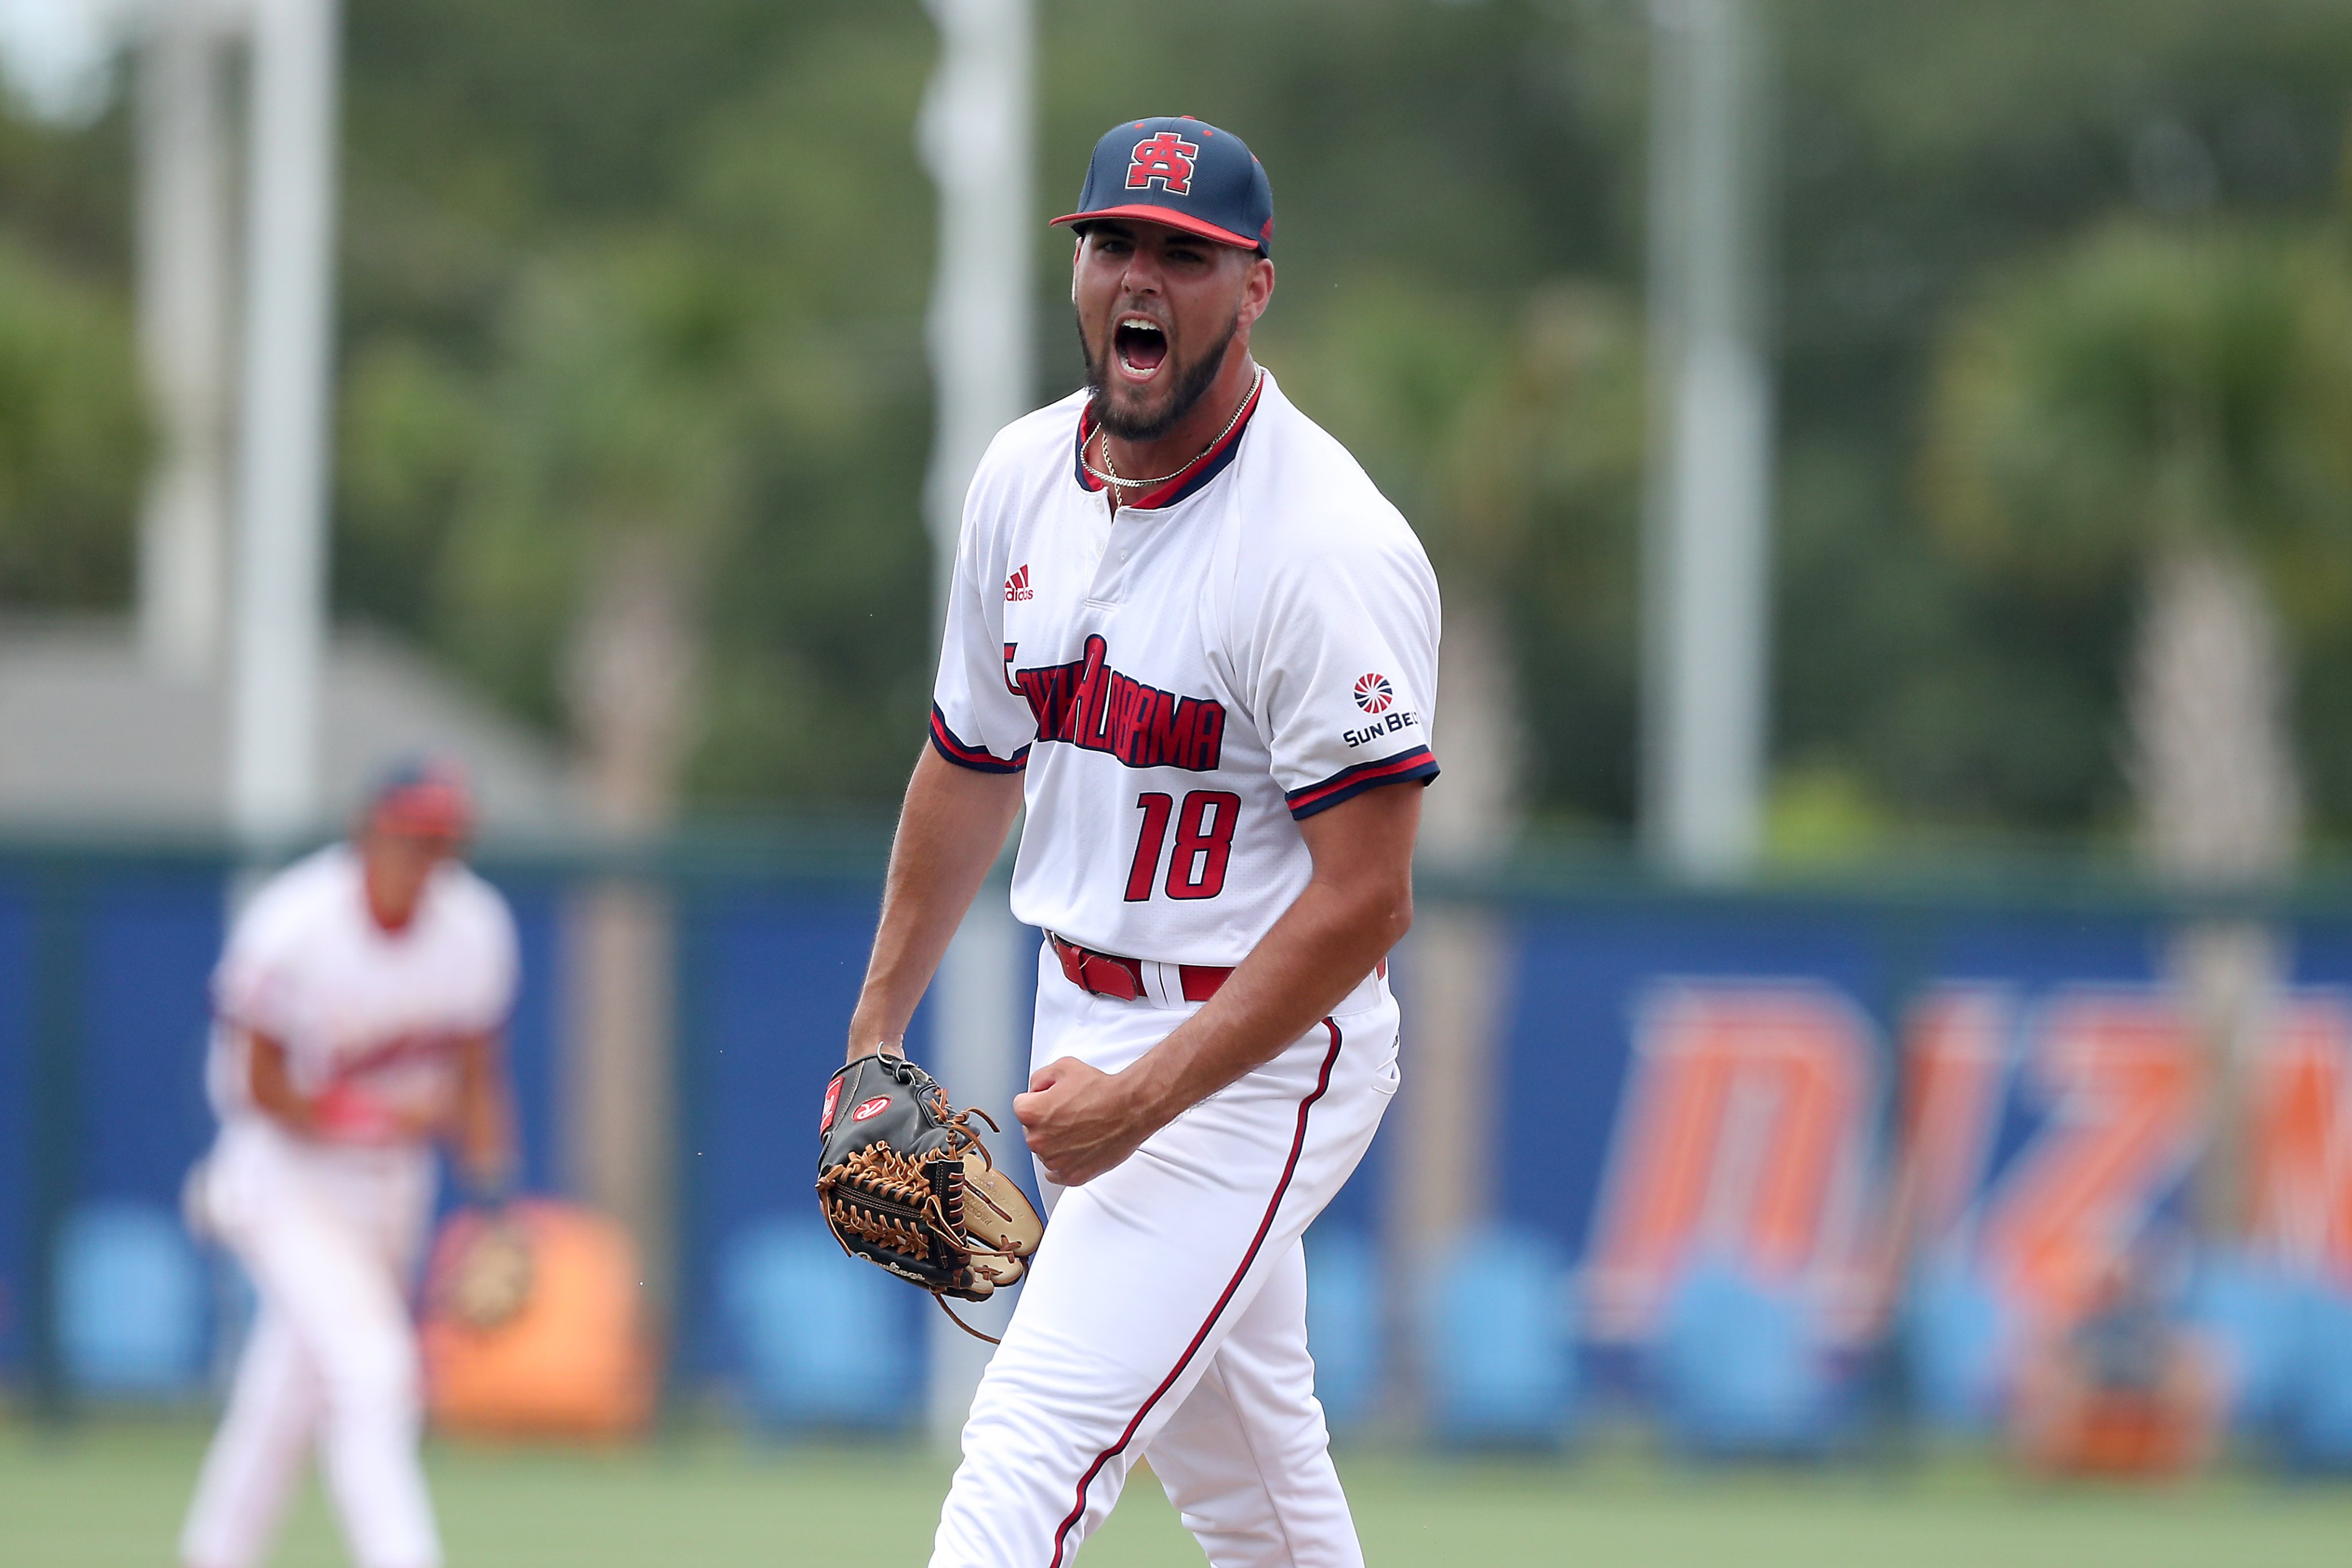 How to watch Miami baseball vs. South Alabama in NCAAs on TV